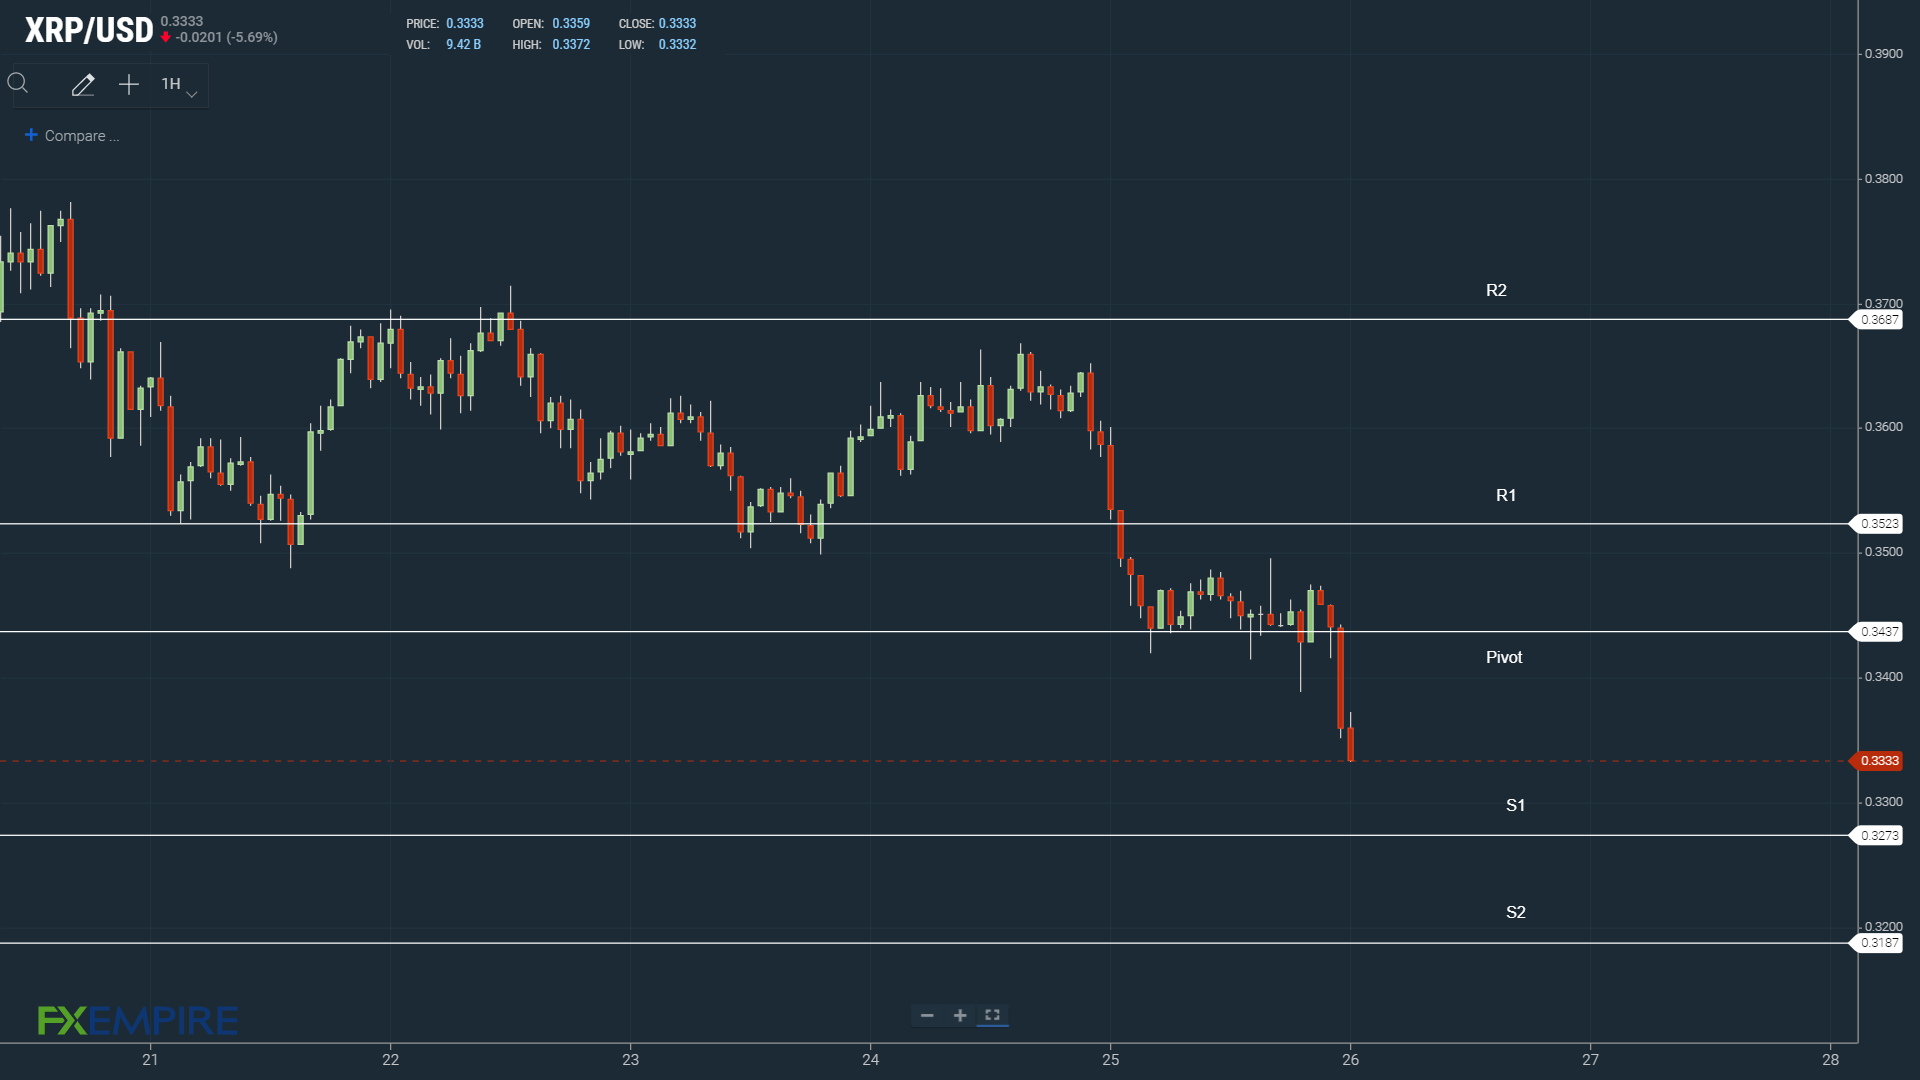 XRP support levels in play